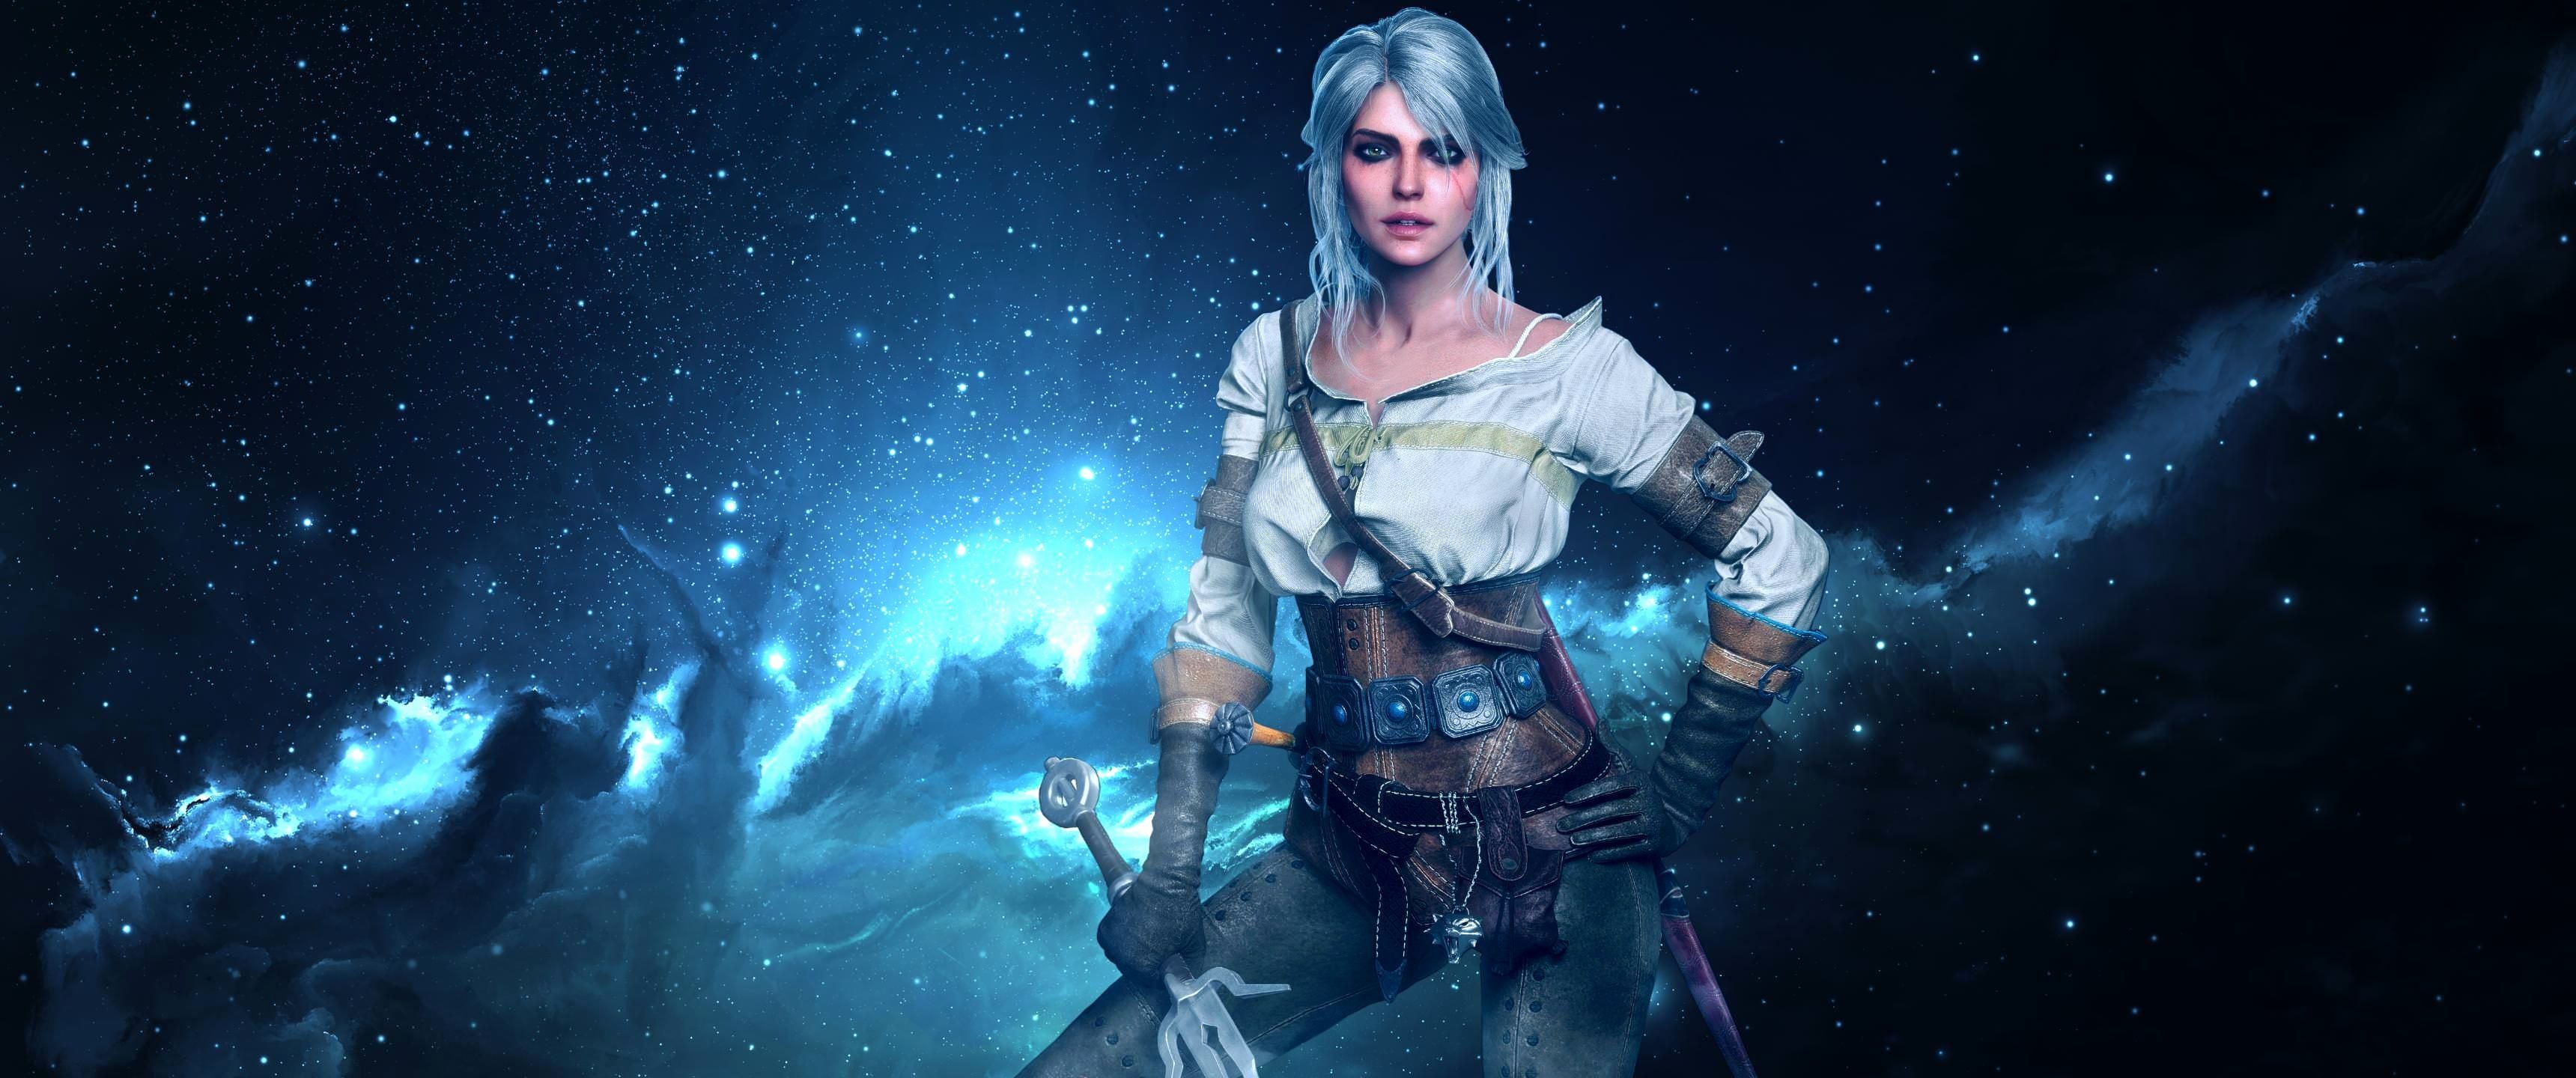 Wallpaper Gaming New Cirilla Another World Wallpaper [3440x1440] thewitcher3 Ps4 Wildhunt Ps4share Games Gaming This Month of The Hudson